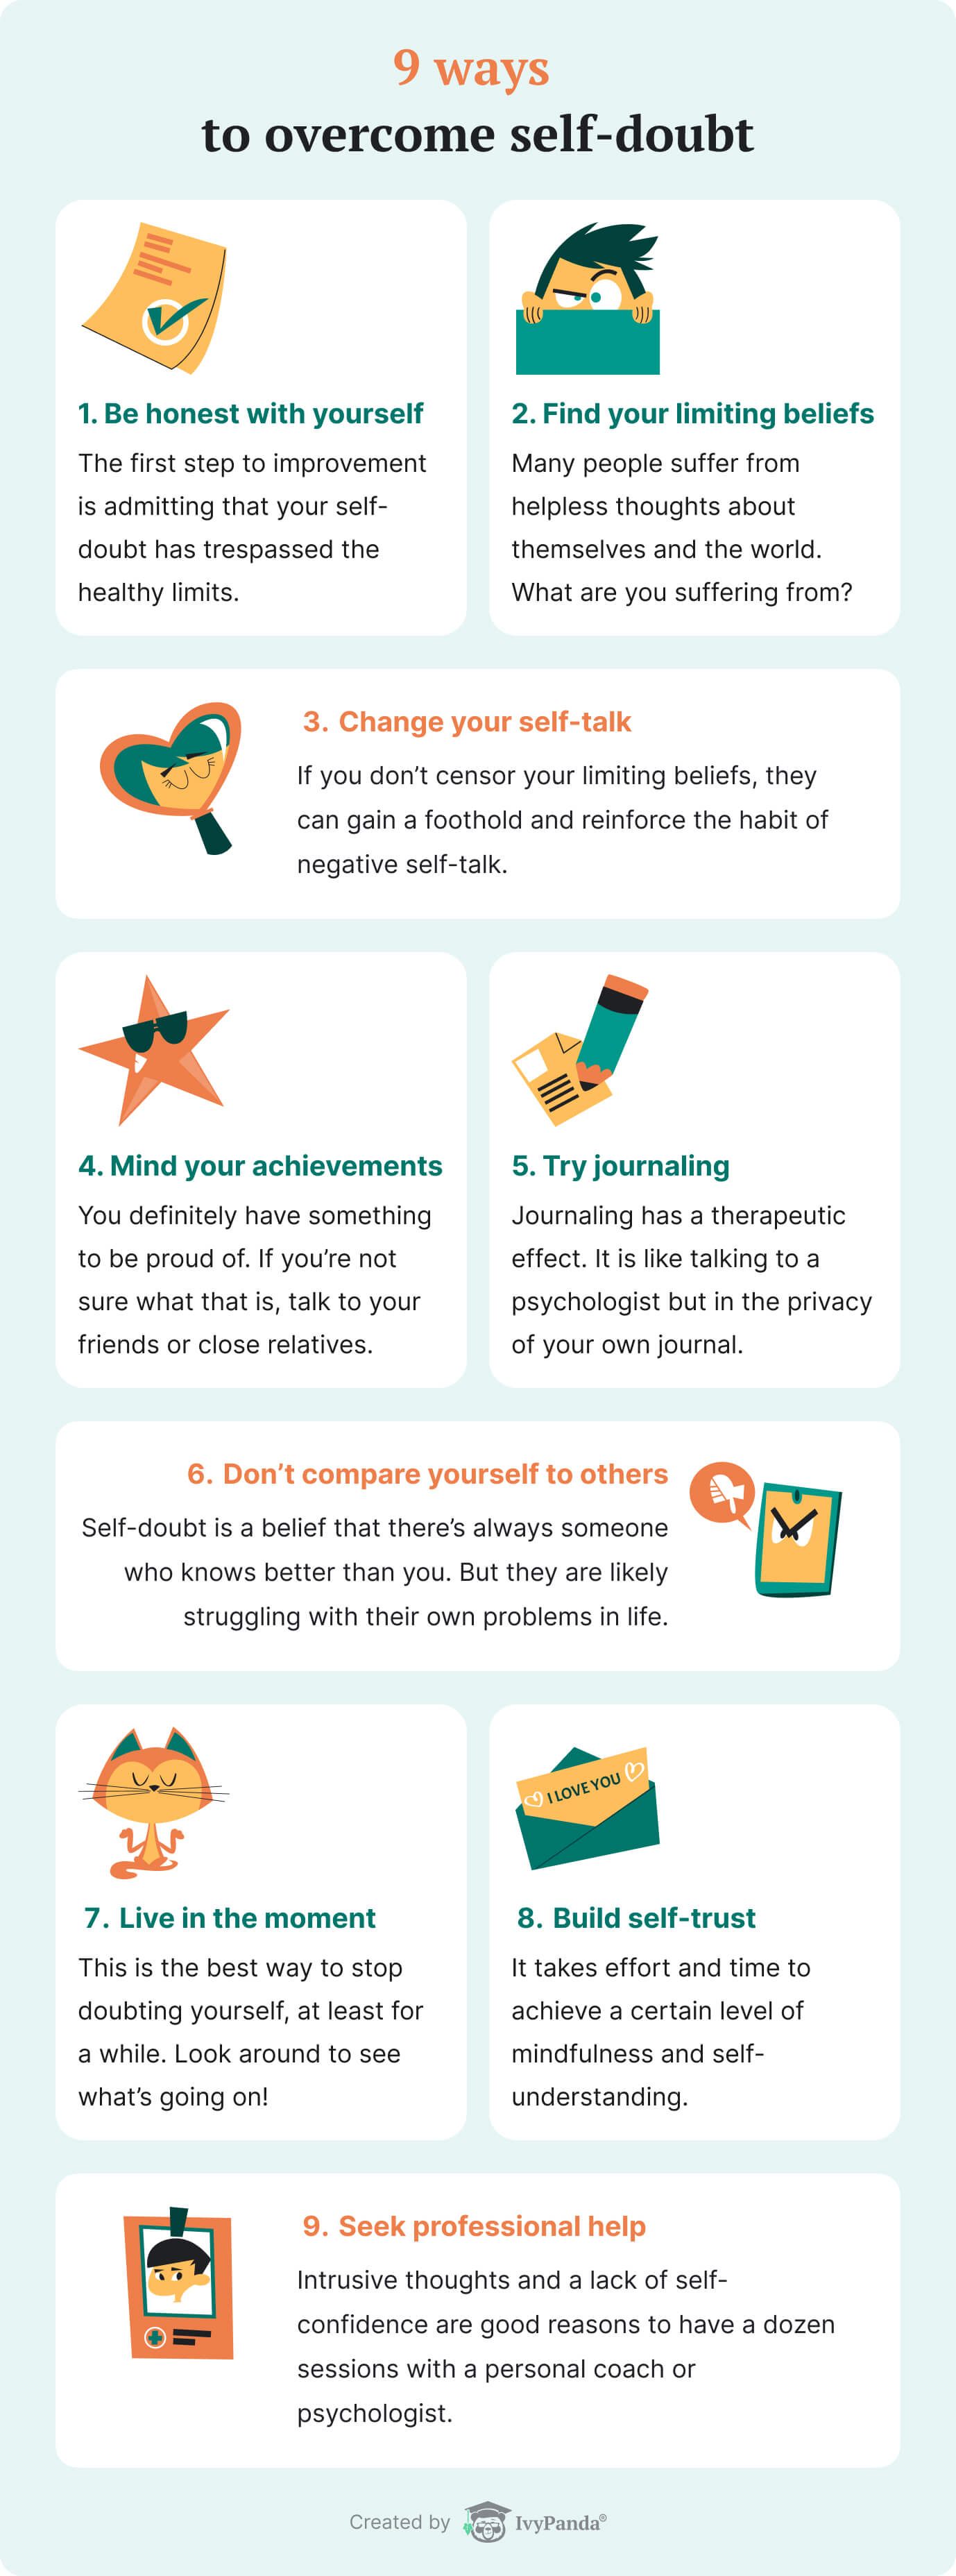 The picture lists 9 useful tips to overcome self-doubt.